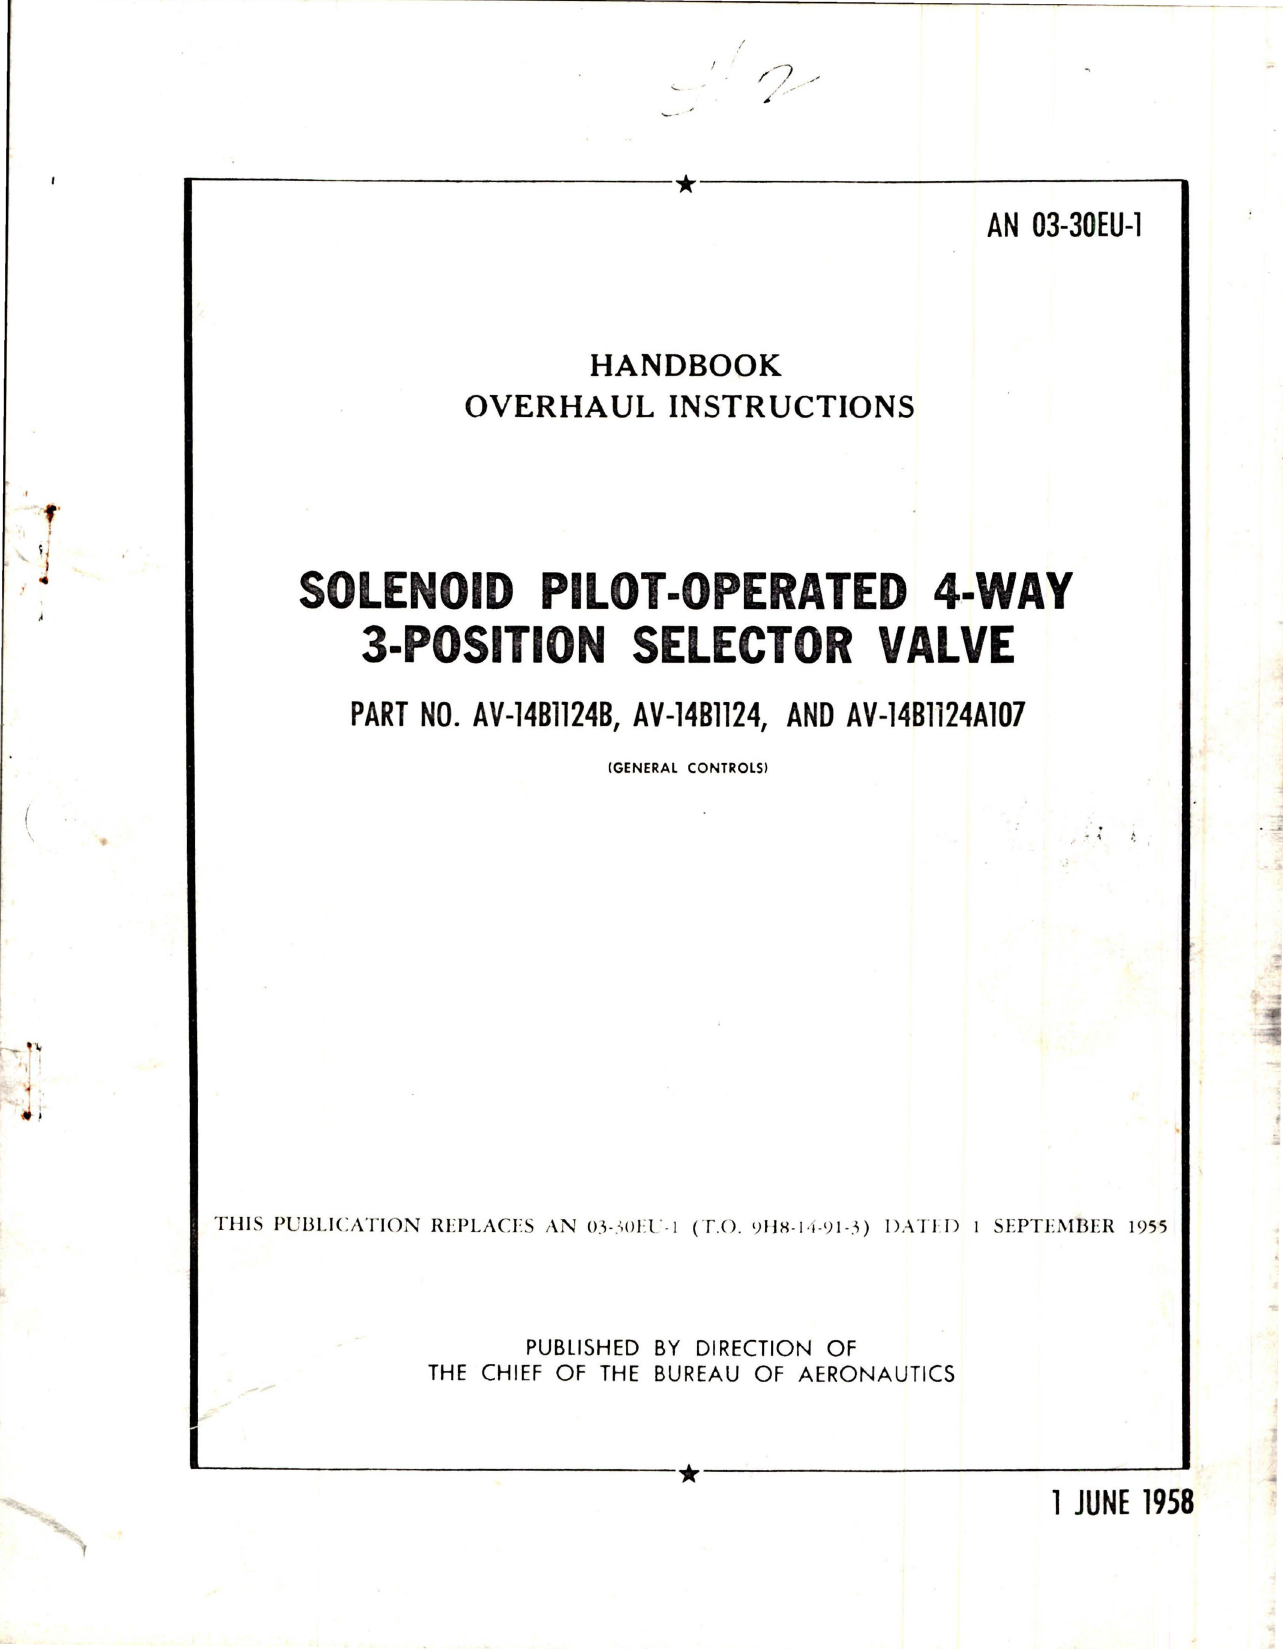 Sample page 1 from AirCorps Library document: Overhaul Instructions for Solenoid Pilot Operated 4-Way 3-Position Selector Valve 